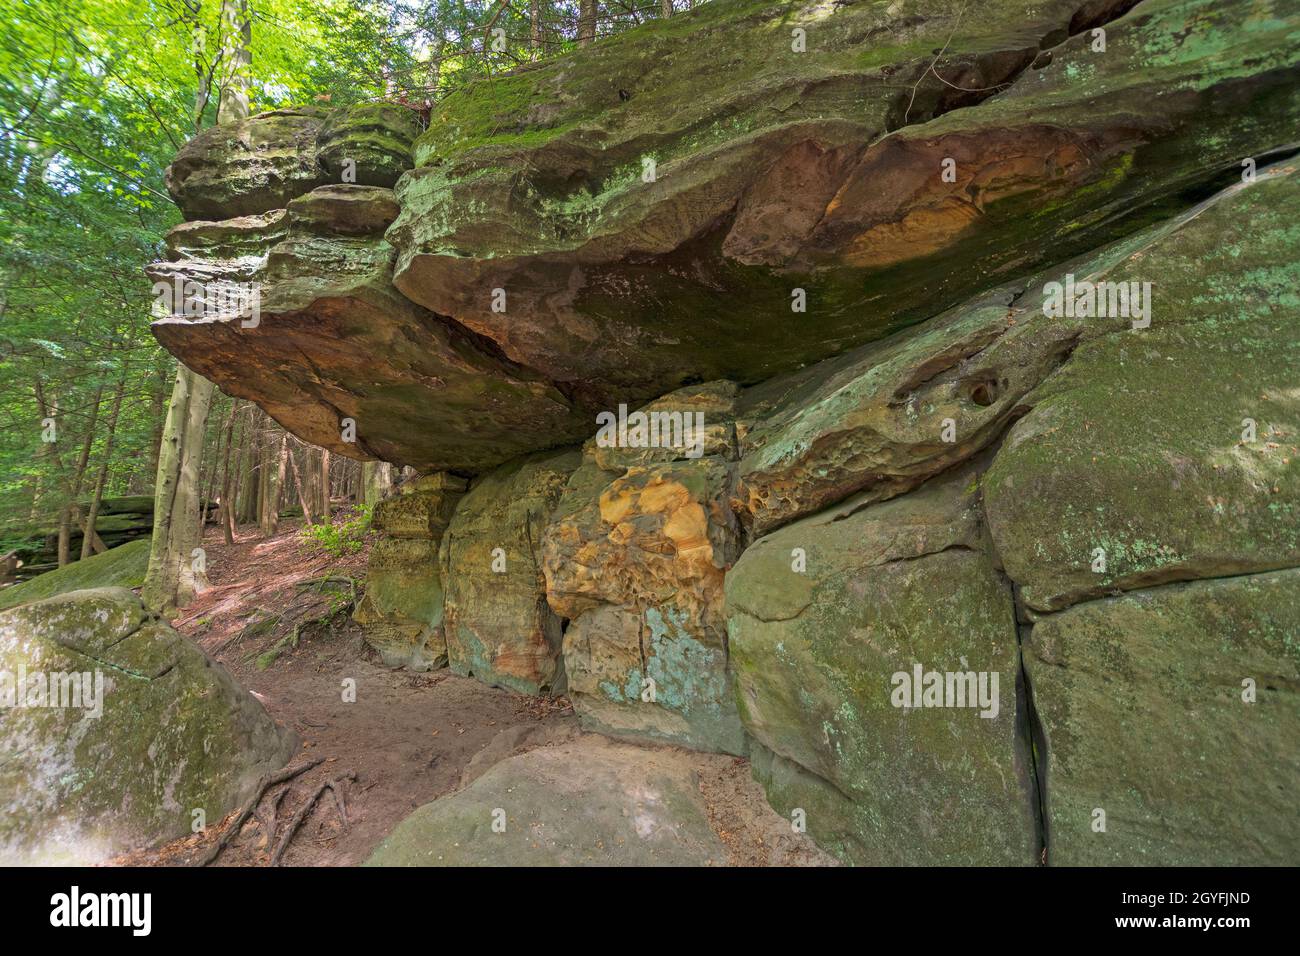 Arenaria sovrahang Hiding nella foresta nel Cuyahoga Valley National Park in Ohio Foto Stock